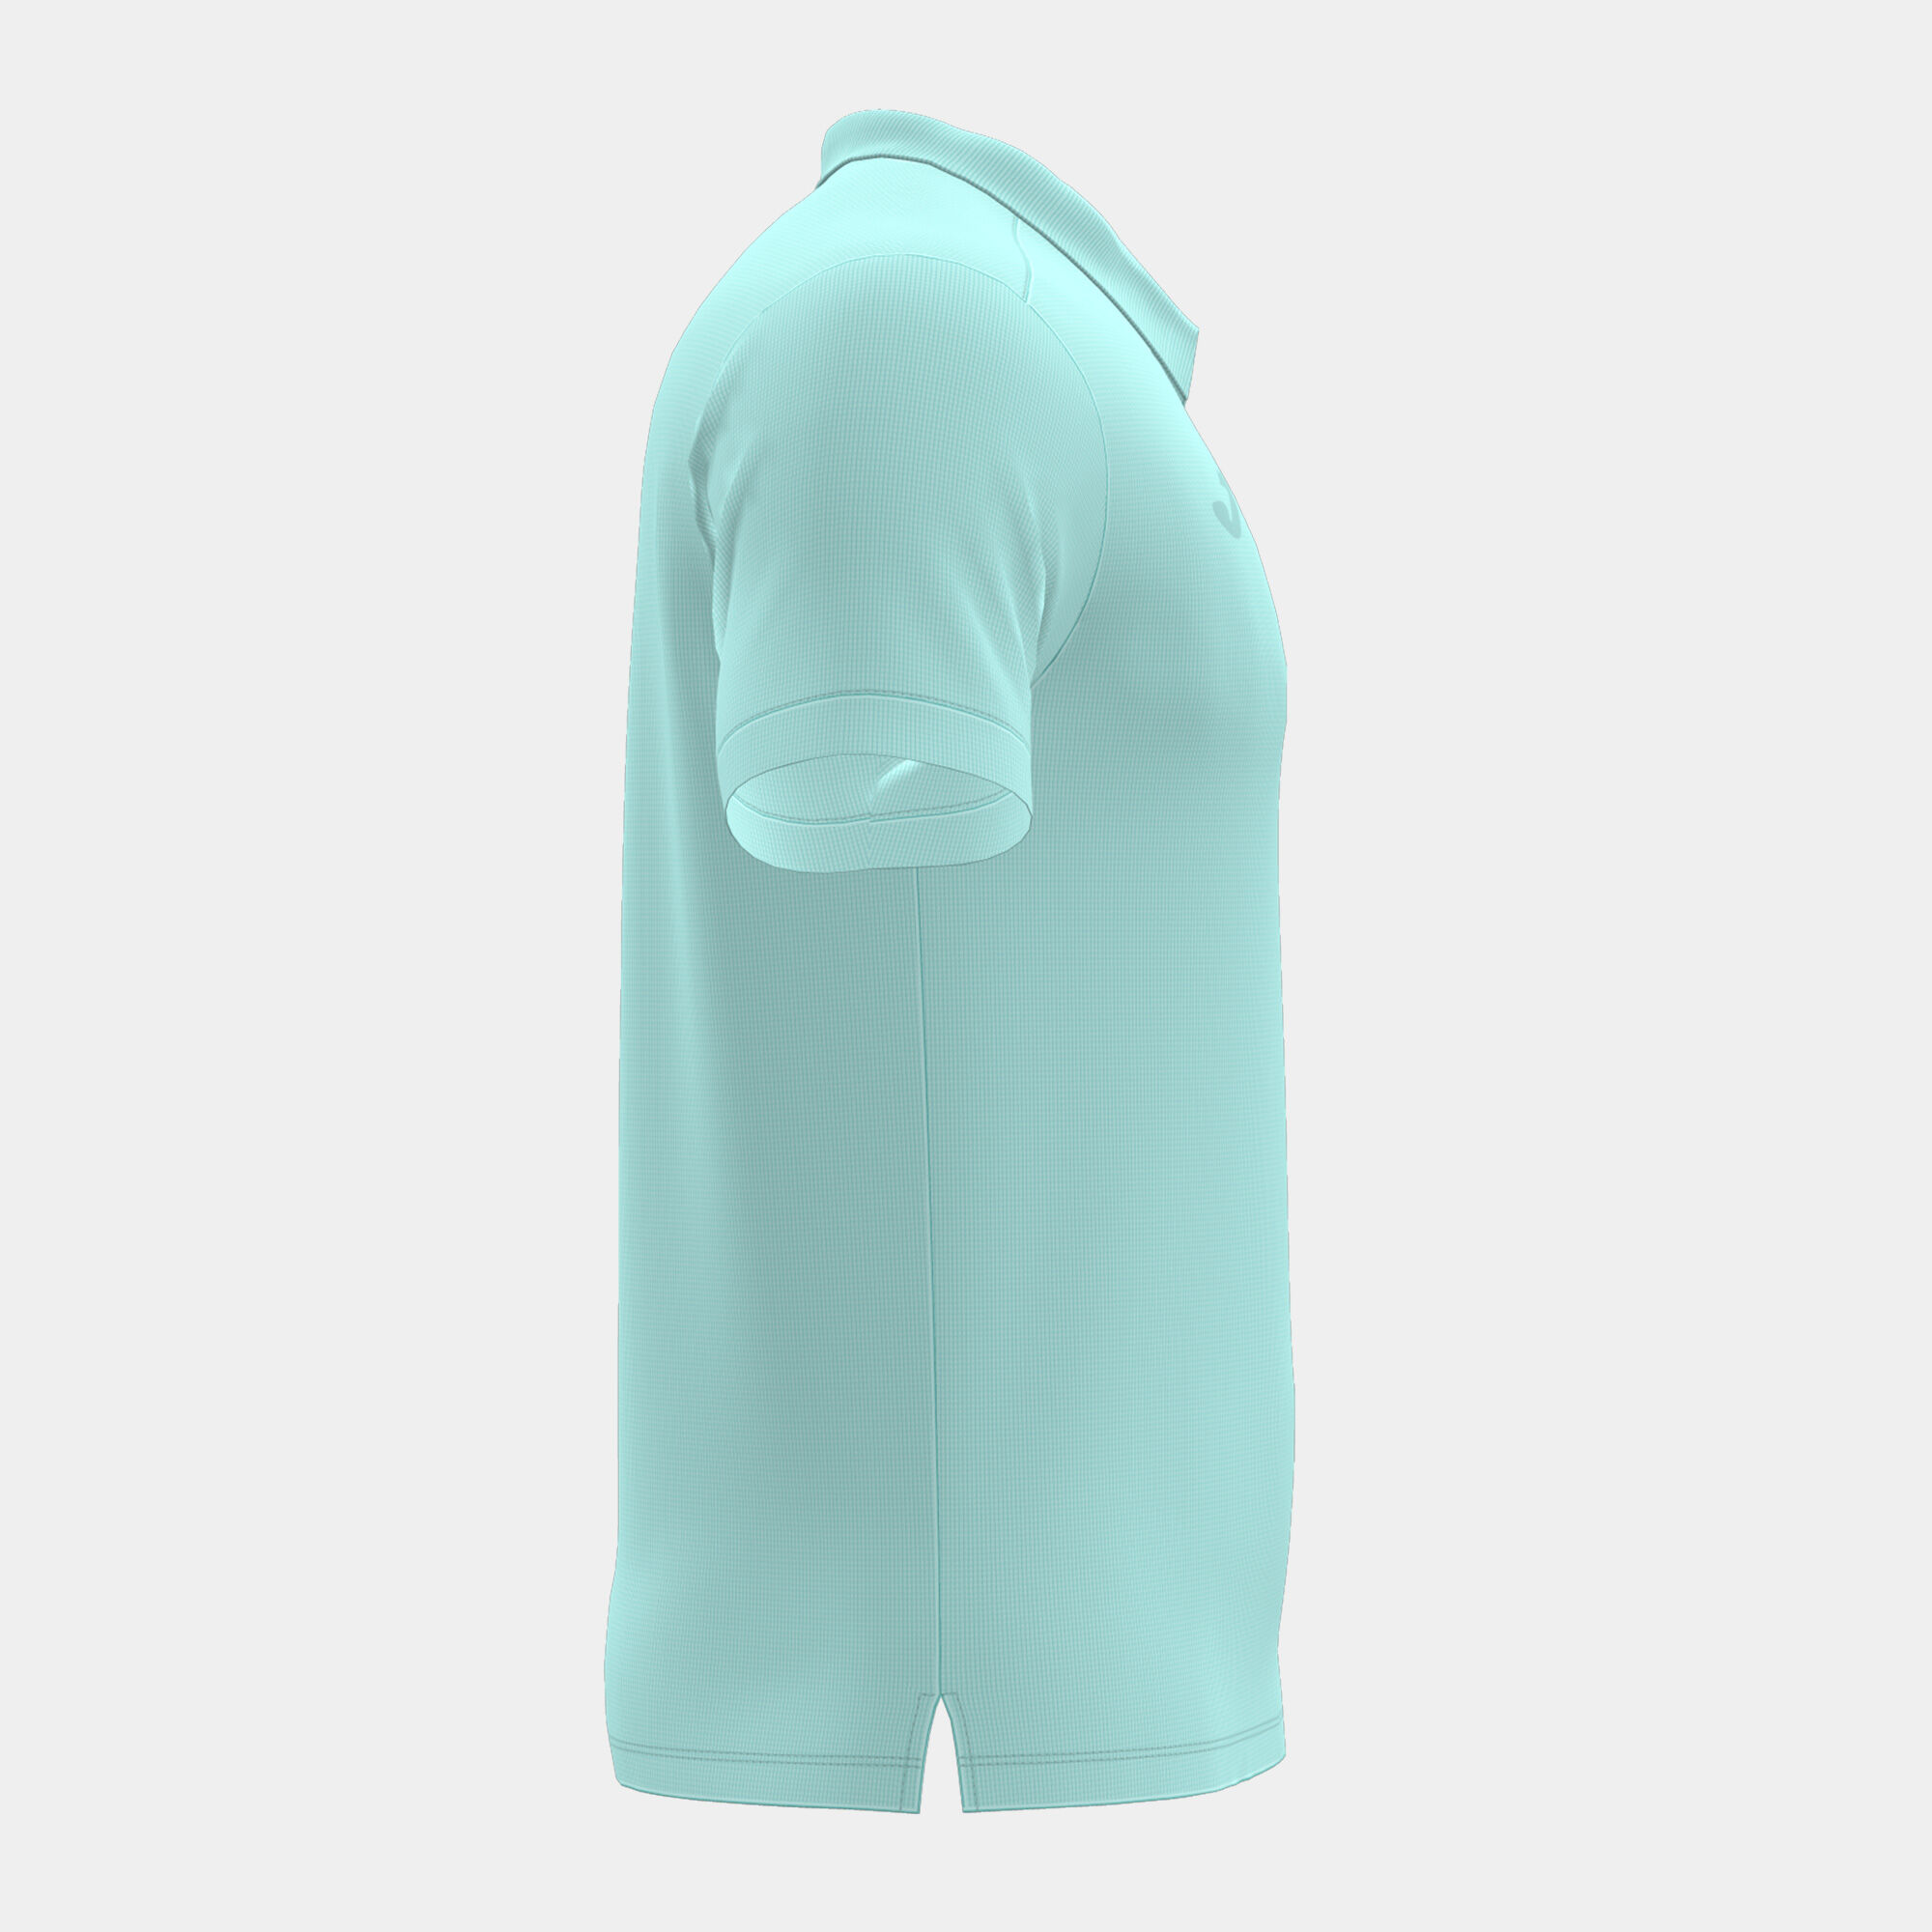 POLO MANCHES COURTES HOMME PASARELA III TURQUOISE